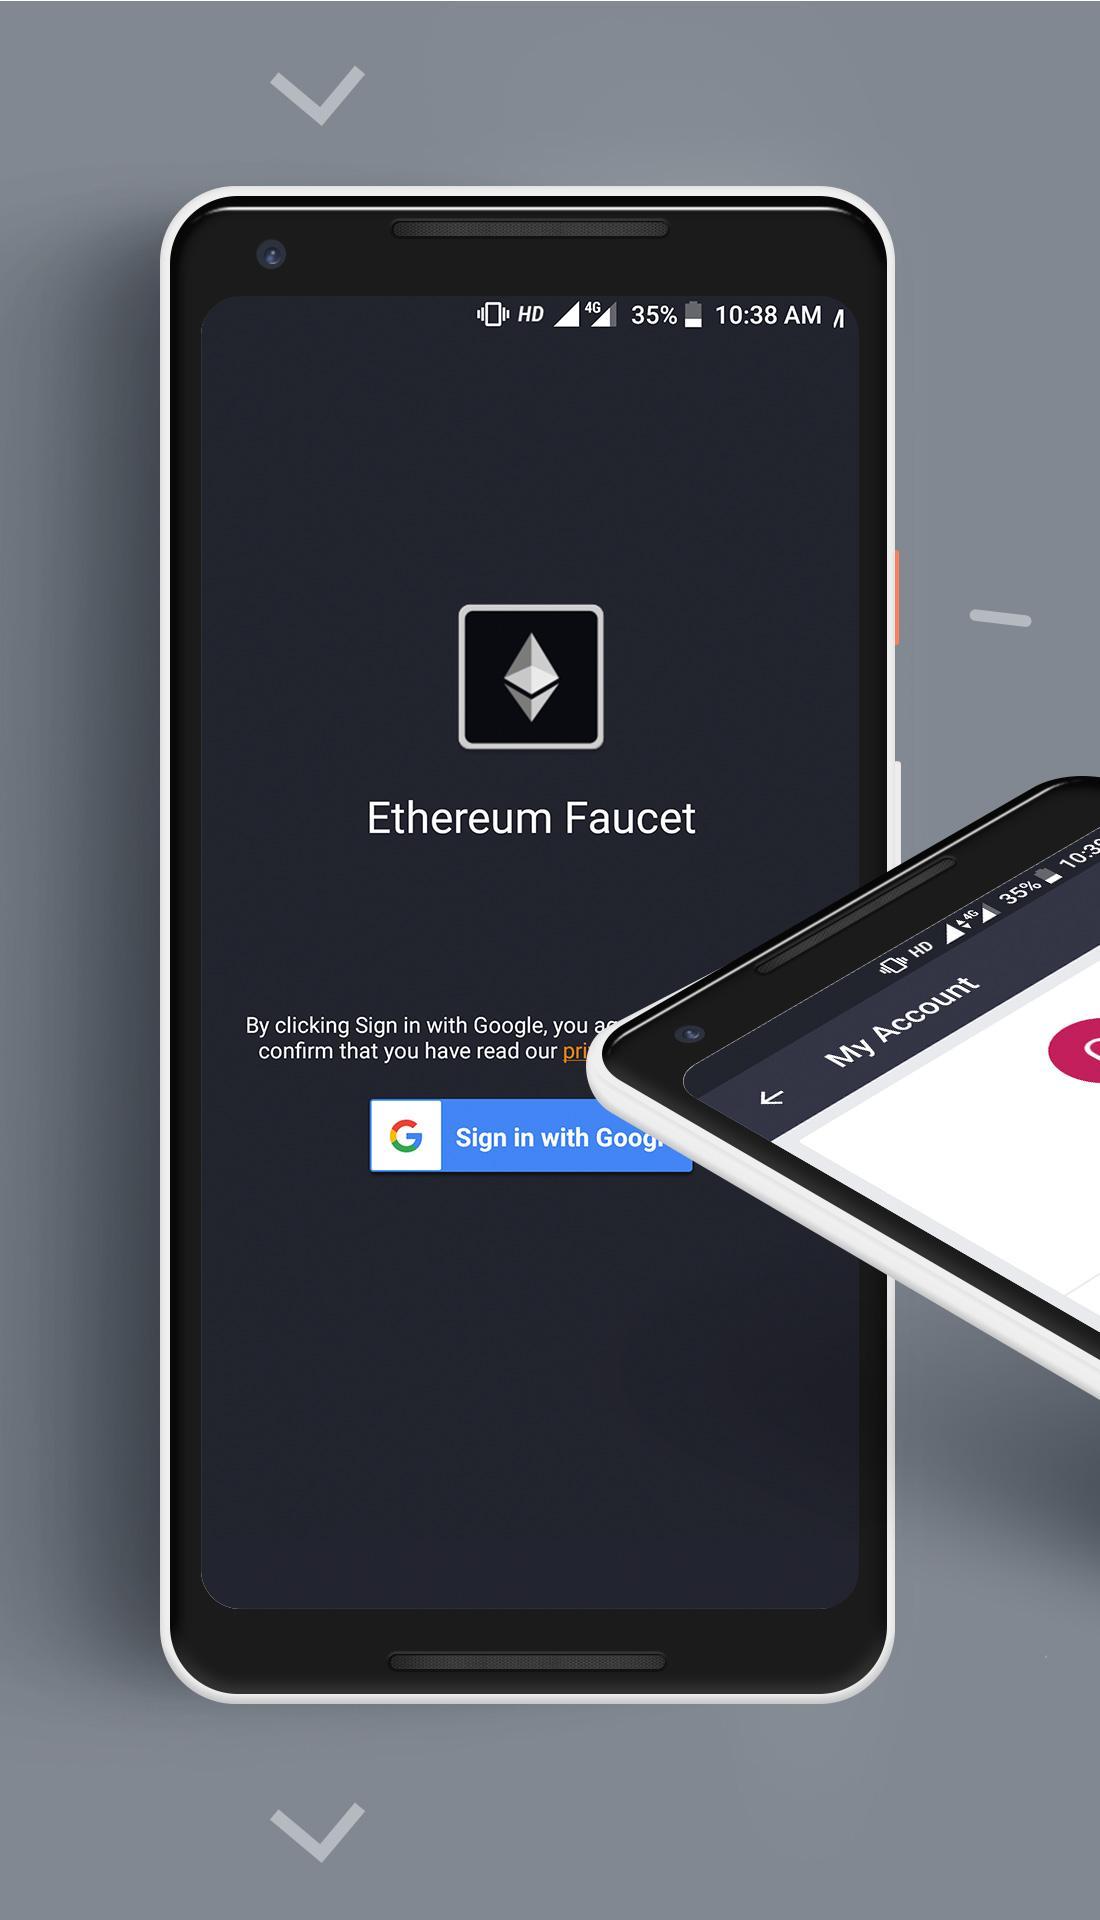 Ethereum Faucet for Android - APK Download